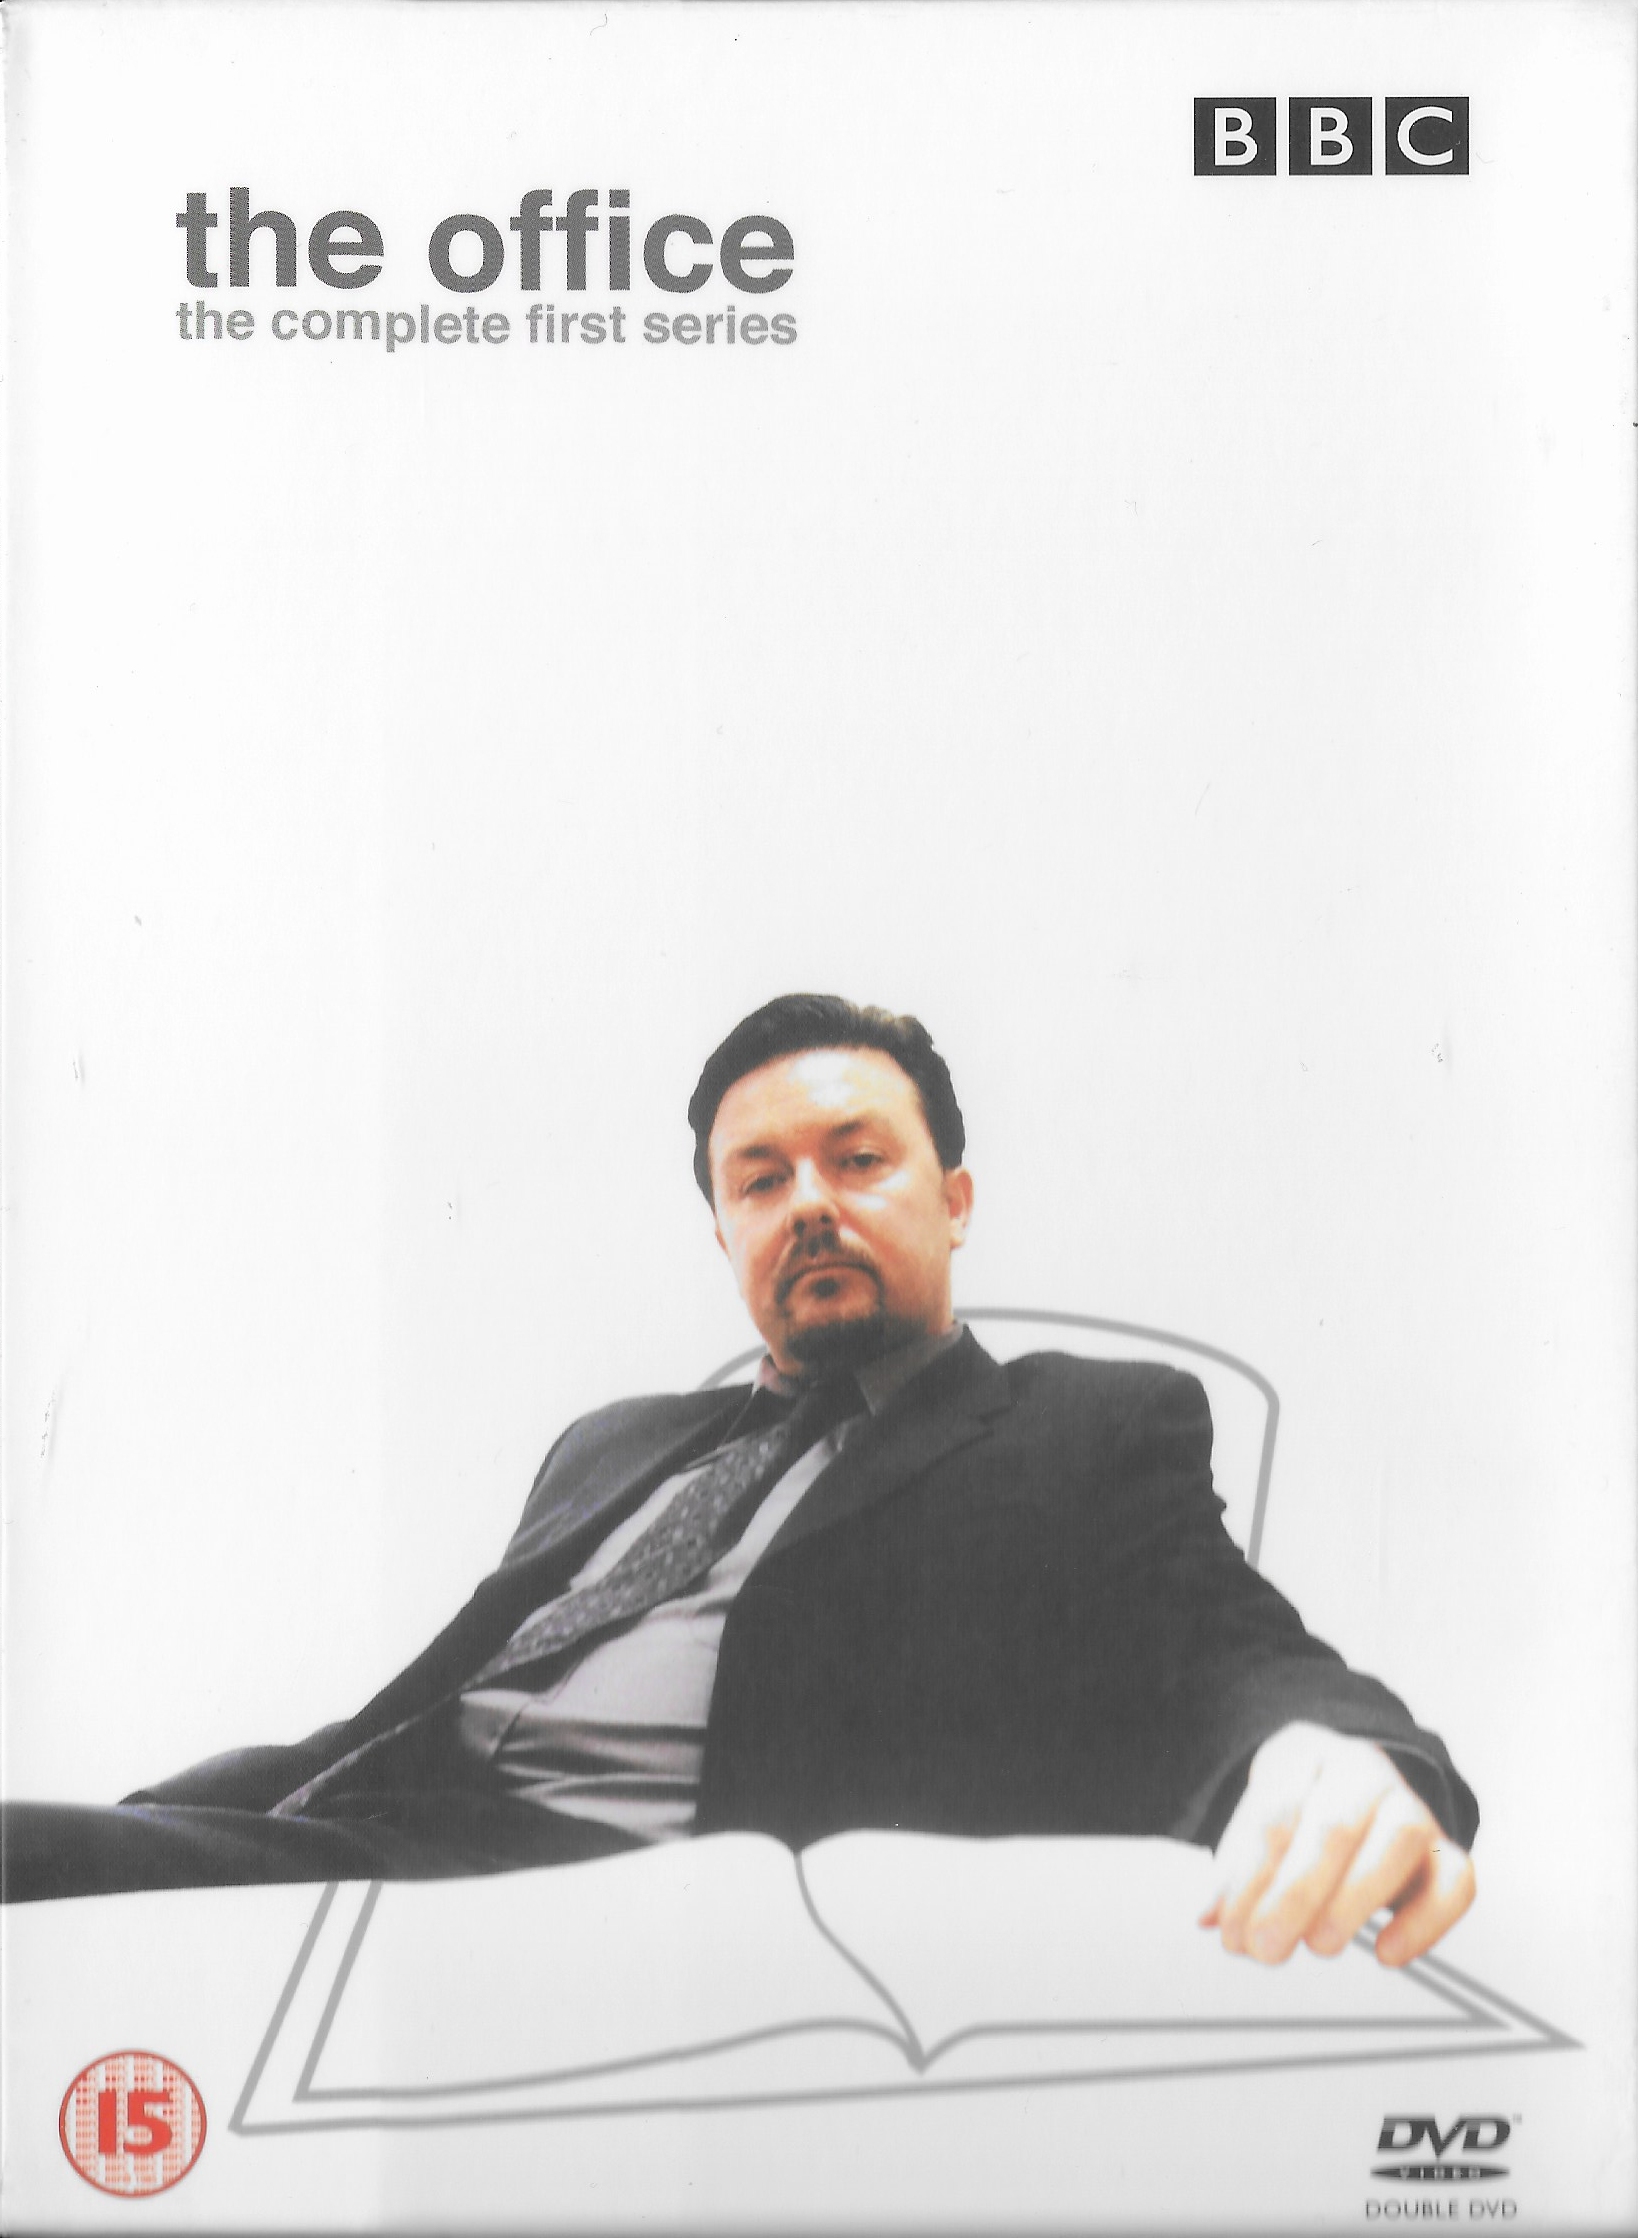 Picture of BBCDVD 1115 The office - The complete first series by artist Ricky Gervais / Steve Merchant from the BBC dvds - Records and Tapes library